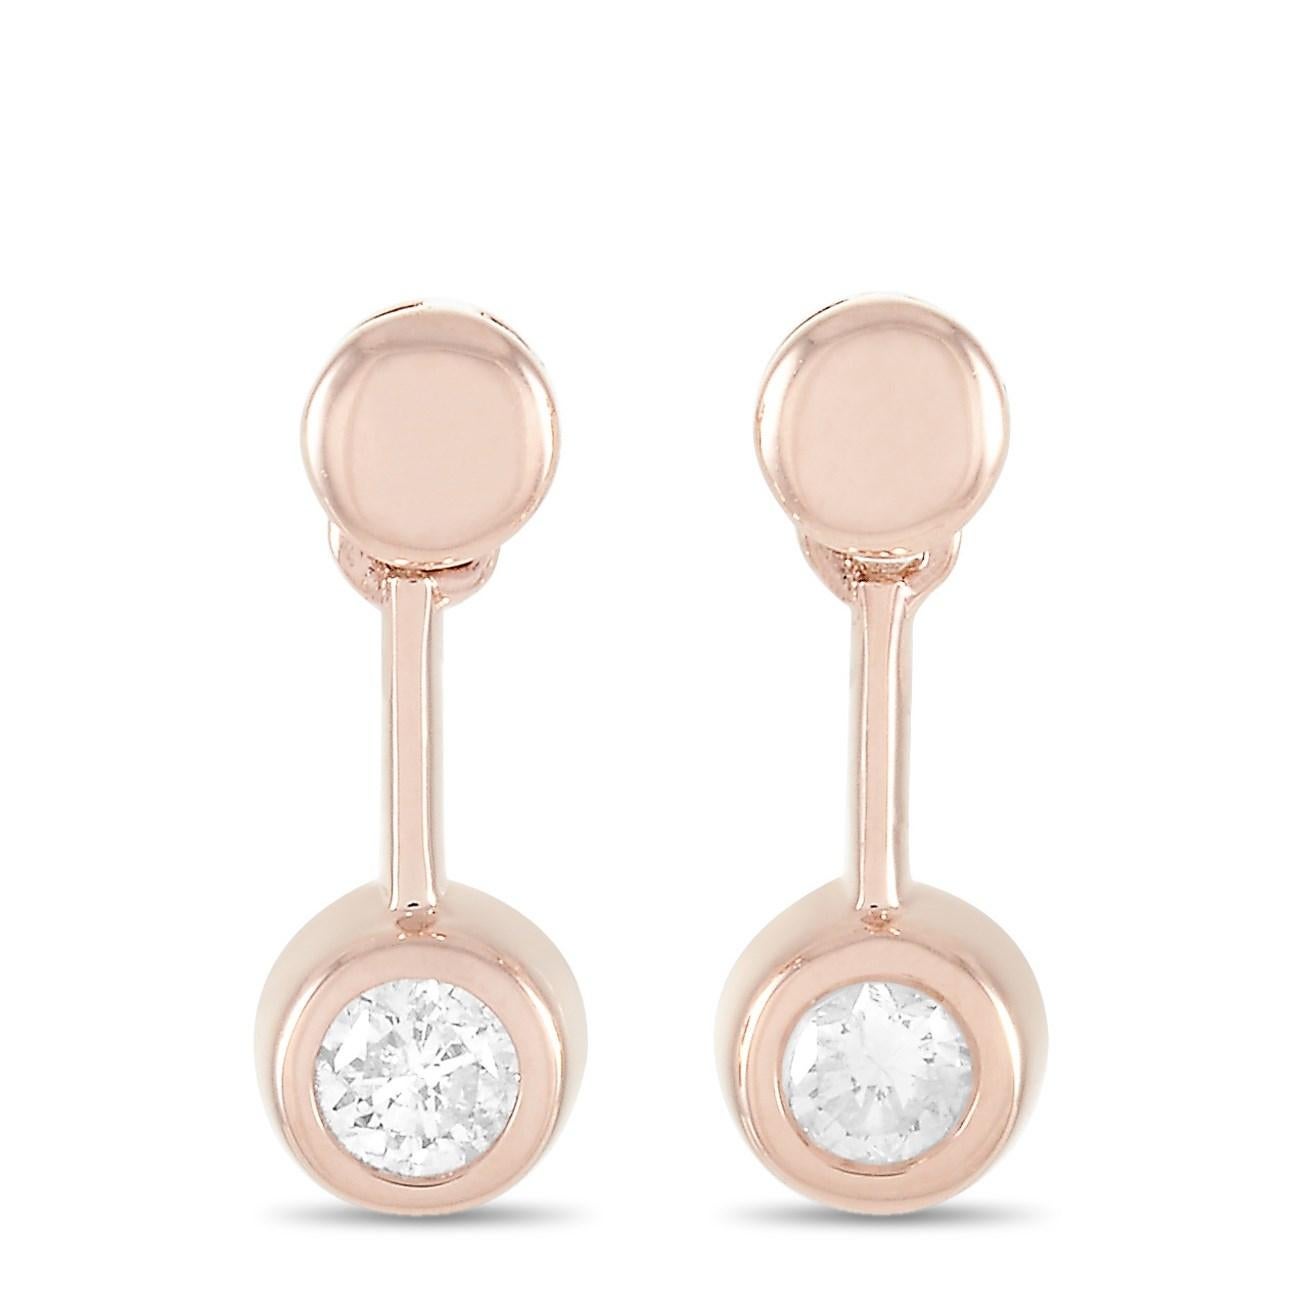 These LB Exclusive earrings are made of 14K rose gold and embellished with diamonds that total 0.16 carats. The earrings measure 0.50” in length and 0.13” in width and each of the two weighs 1 gram.

The pair is offered in brand-new condition and